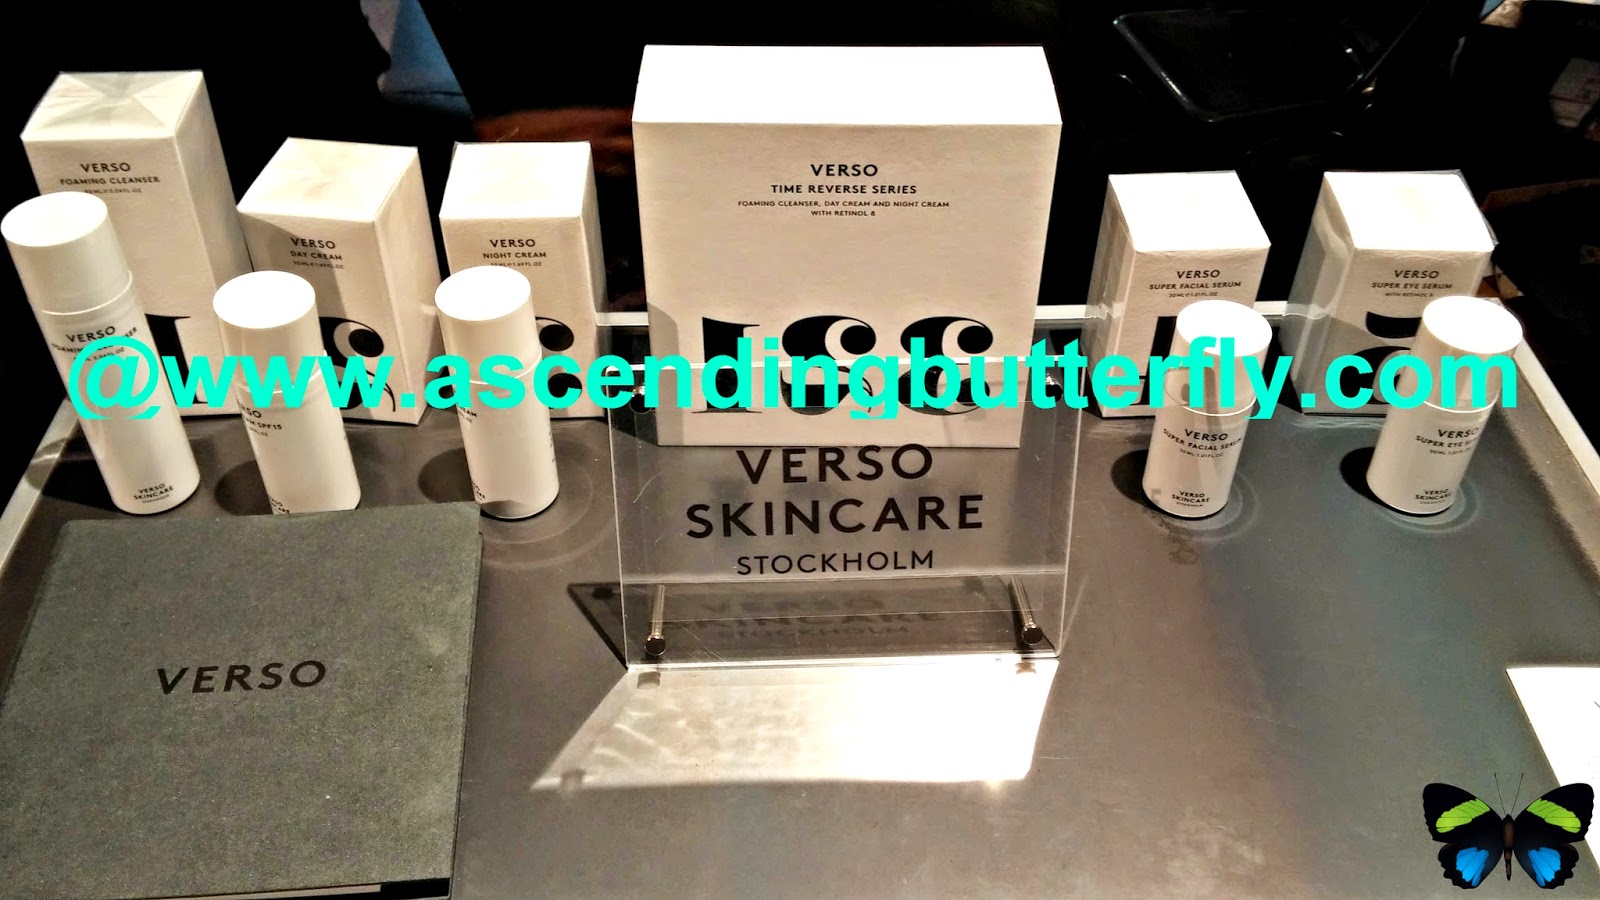 Verso Skincare offers the first non-prescription high dose Vitamin A derivative that can be used safely in the daytime